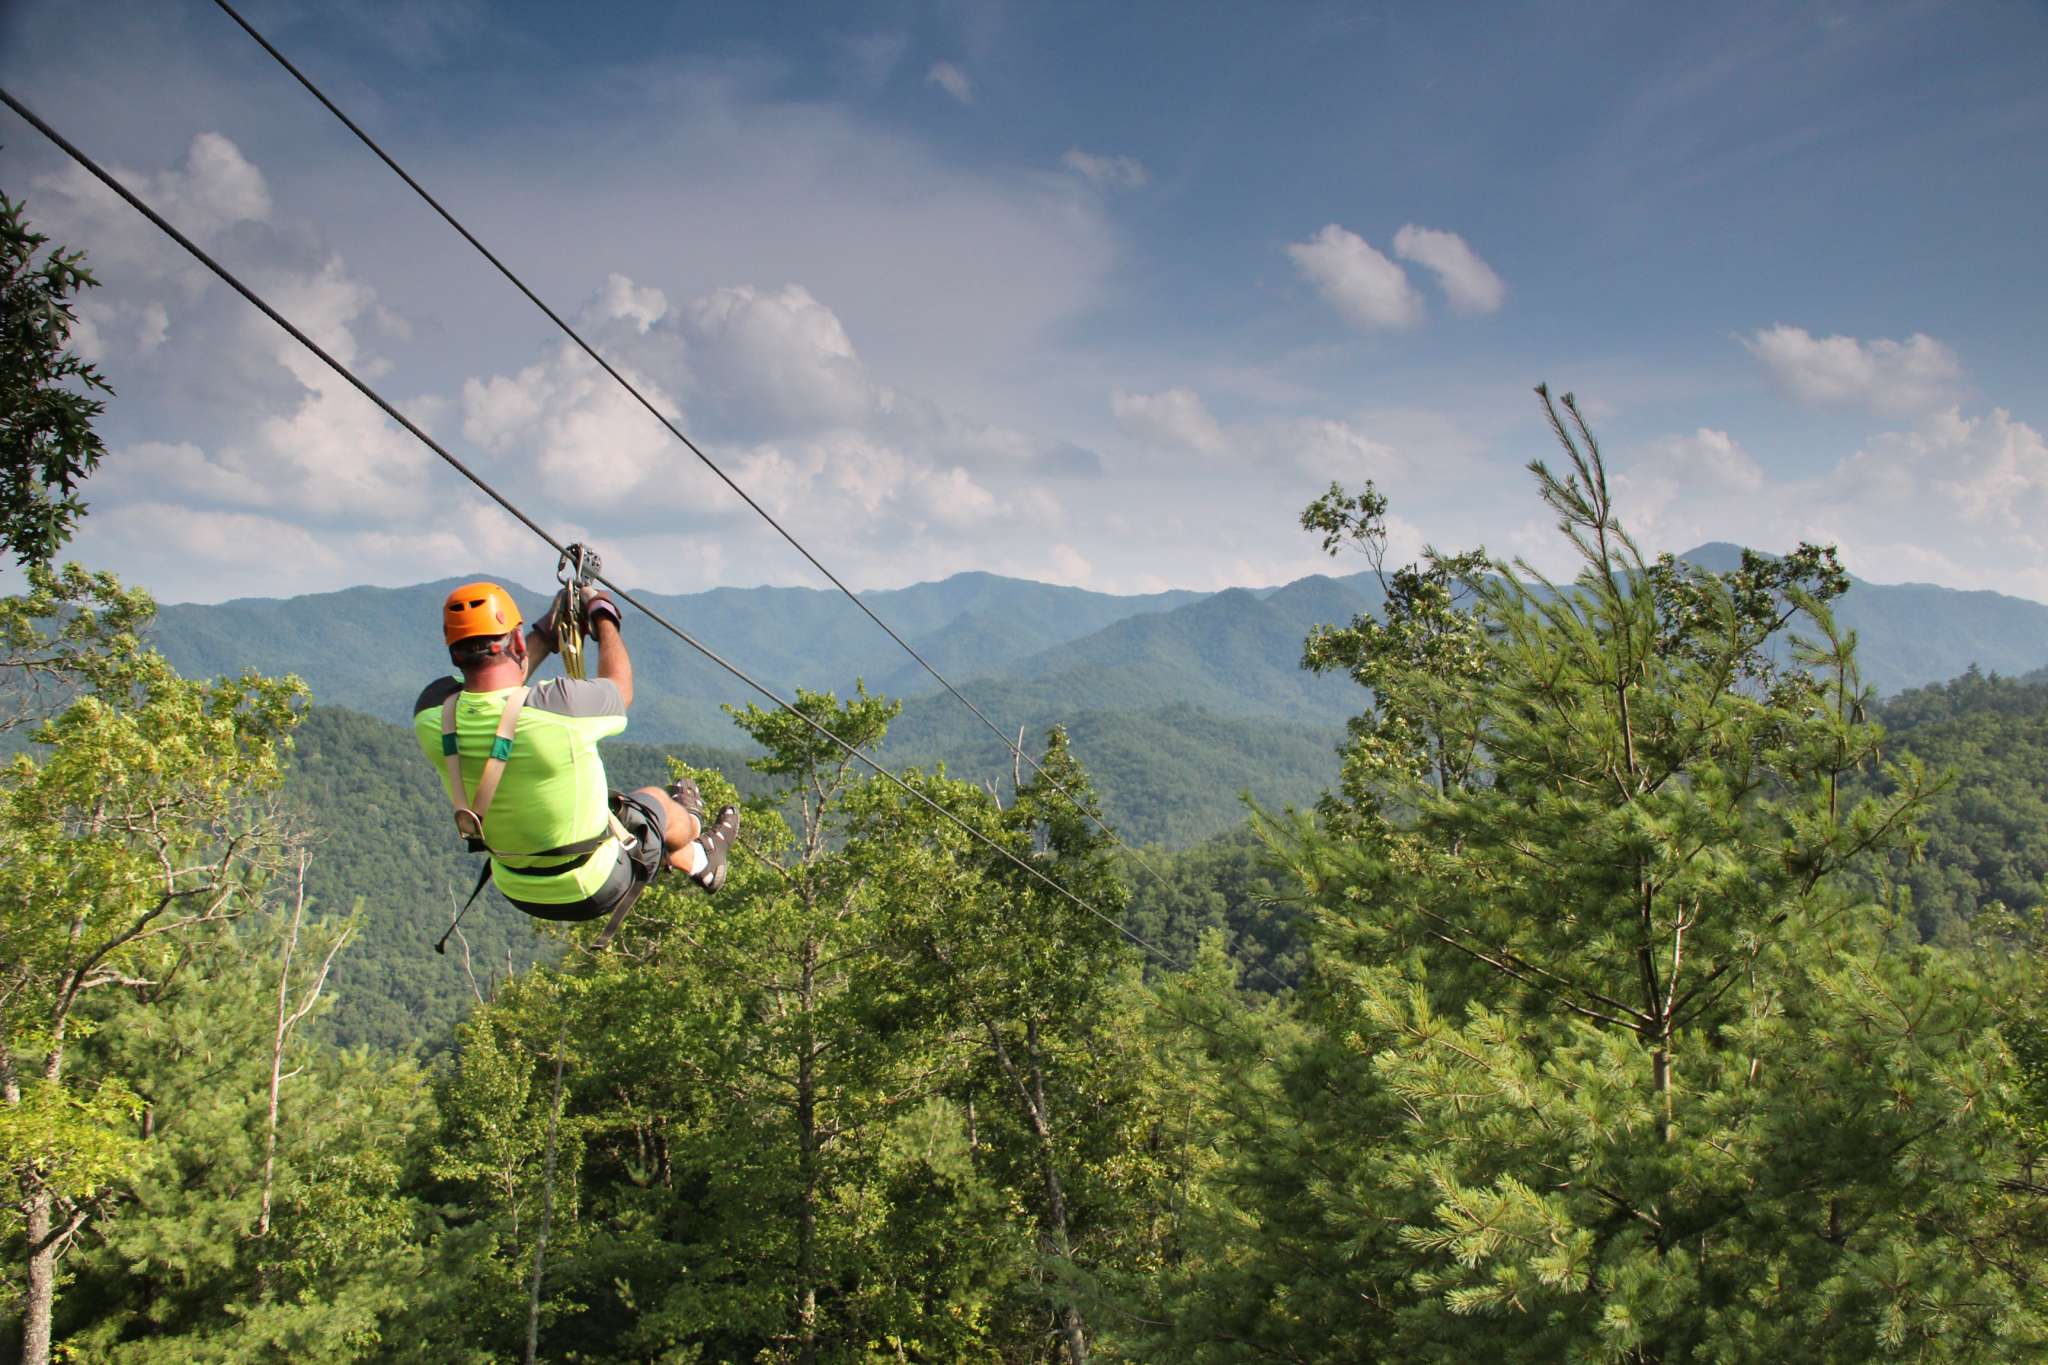 ziplining in the smoky mountains with NOC